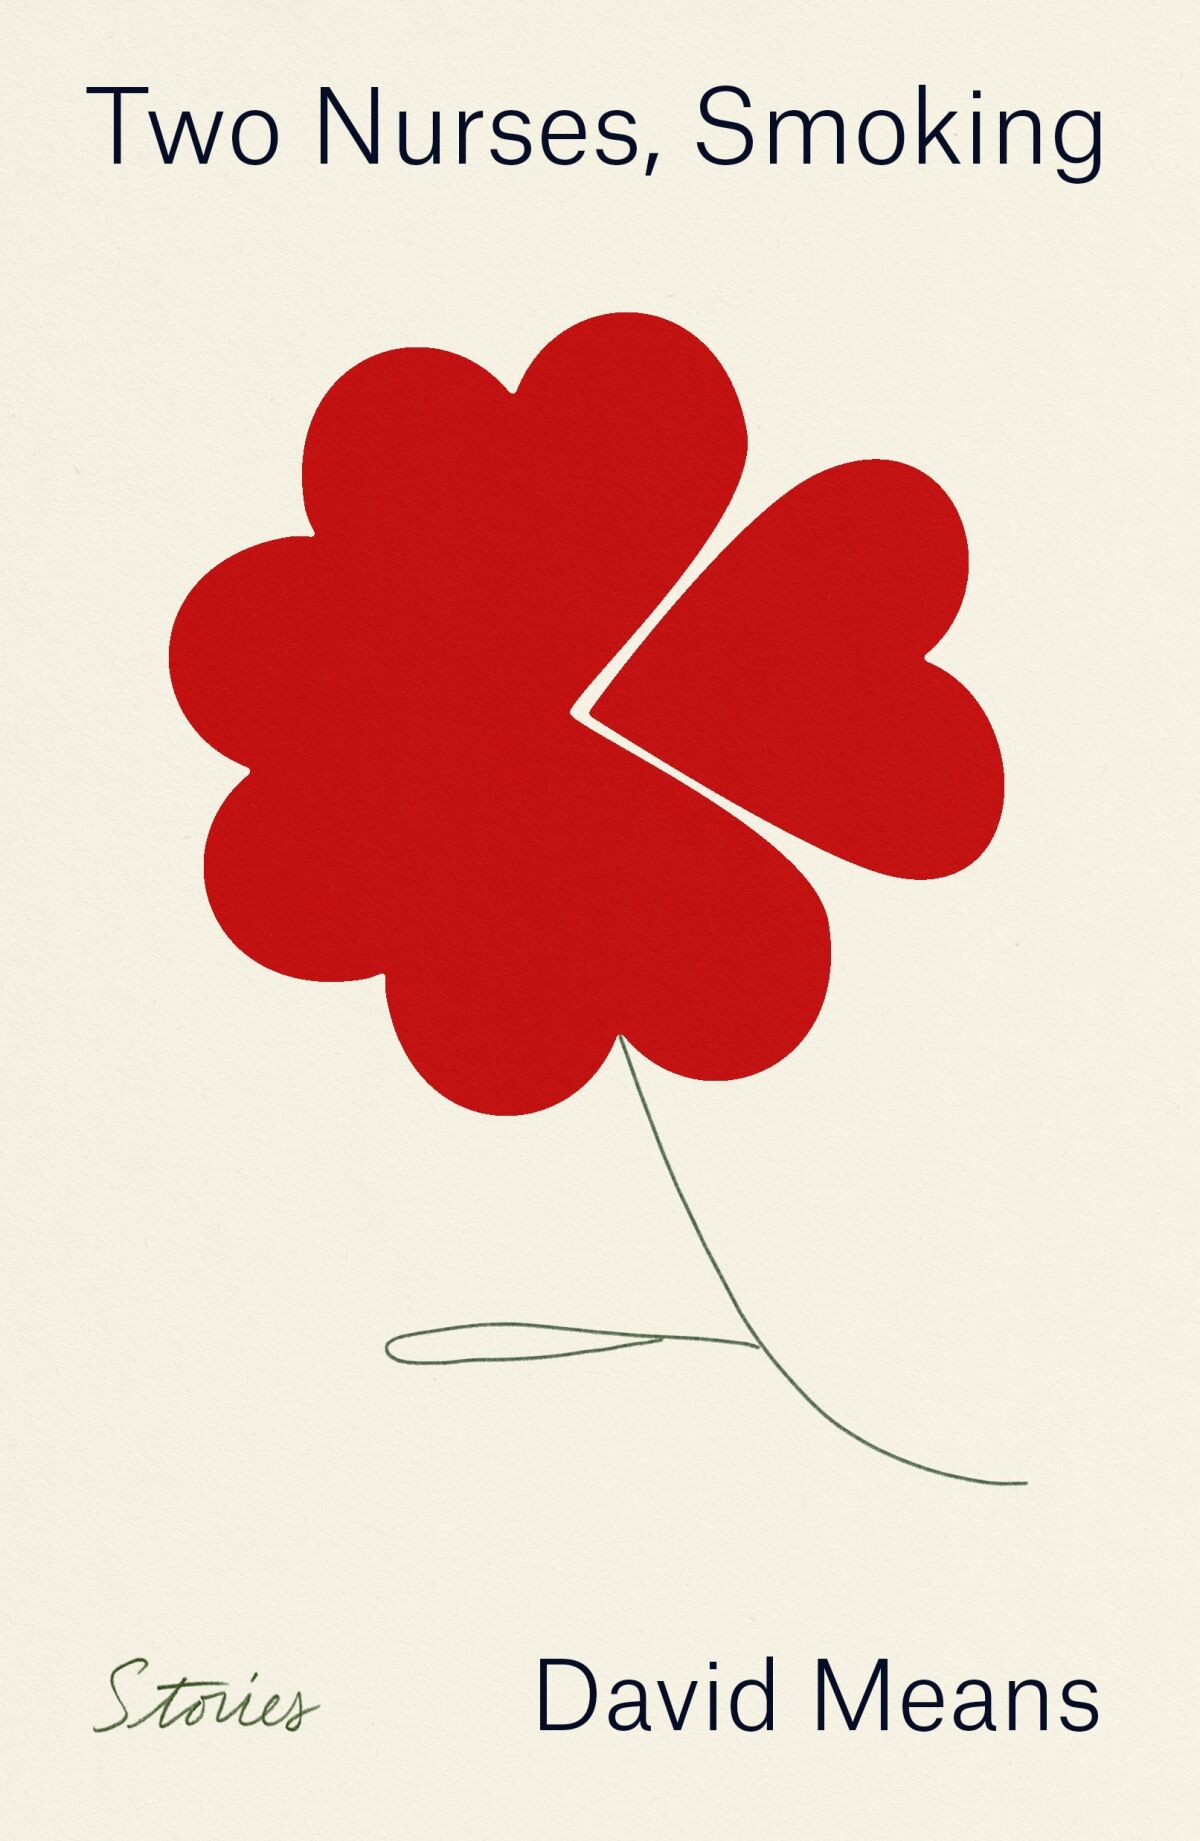 The cover of "Two nurses smoking" by David Means, features a flower of flat red hearts